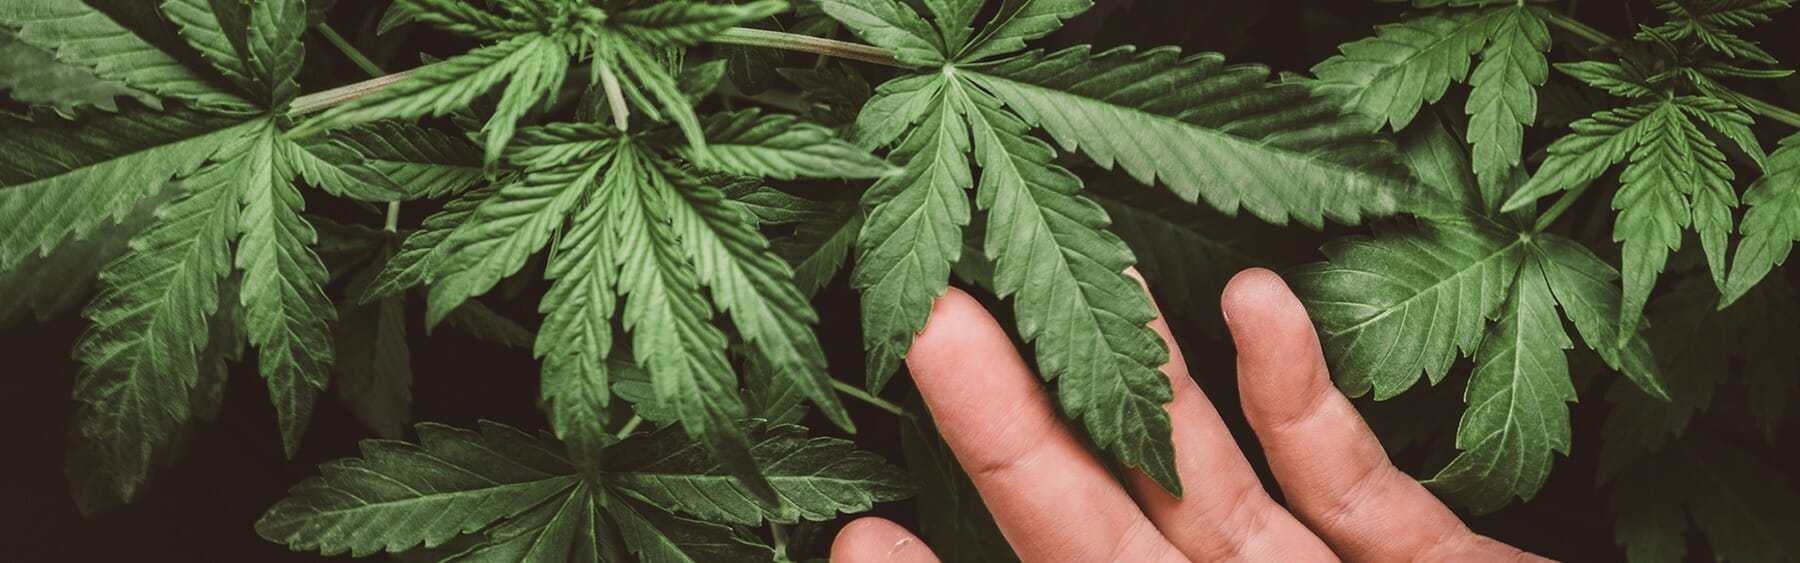 A person's hand reaching out to a cannabis plant.